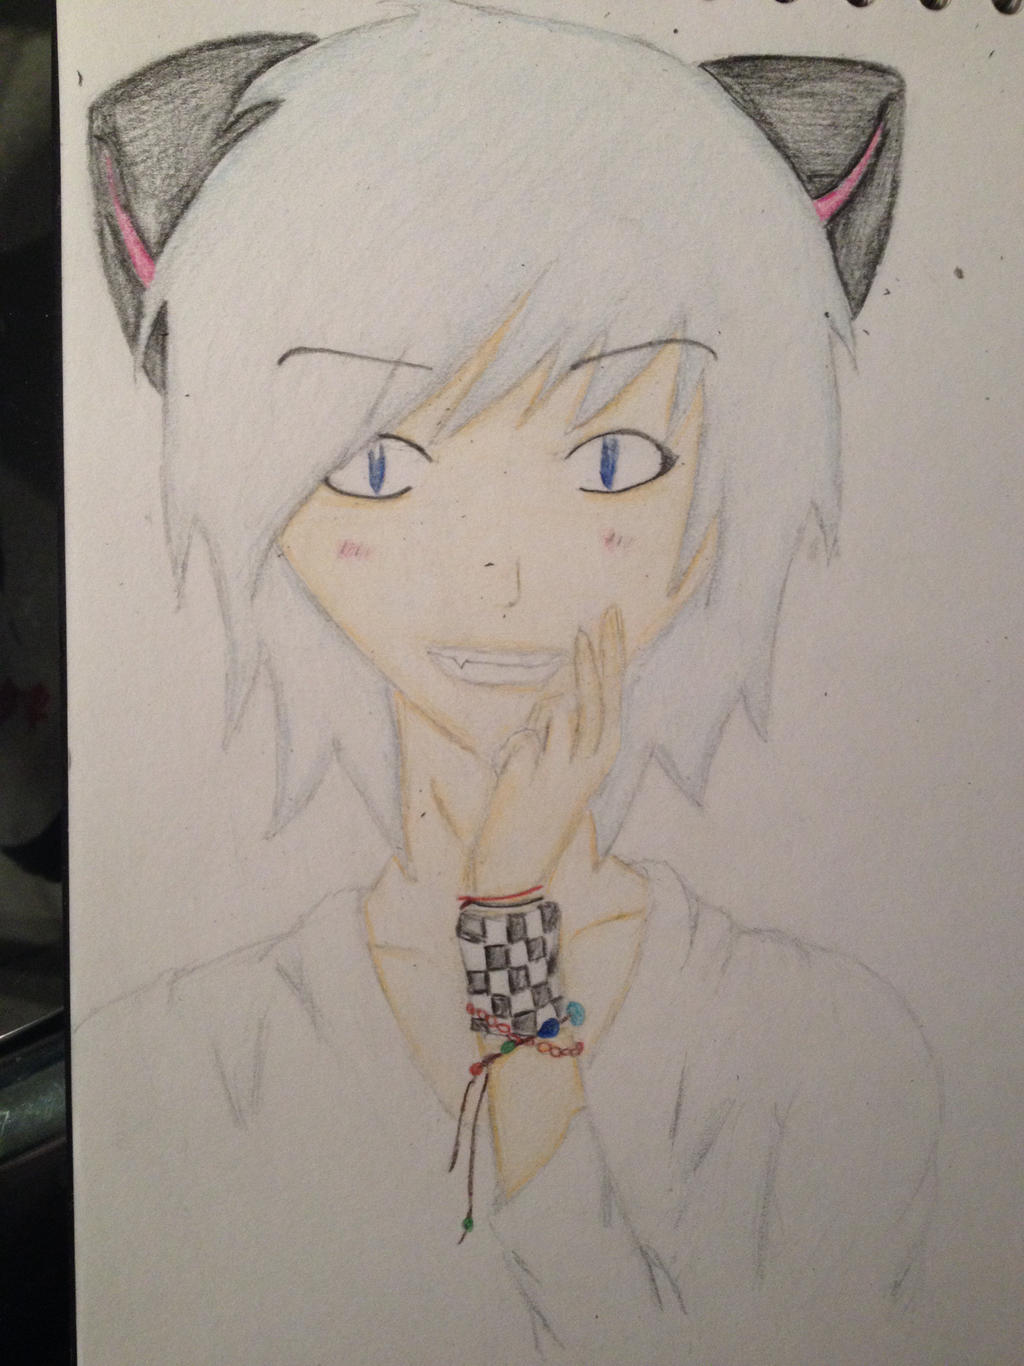 Anime guy with cat ears by DeathsHarmartia on DeviantArt